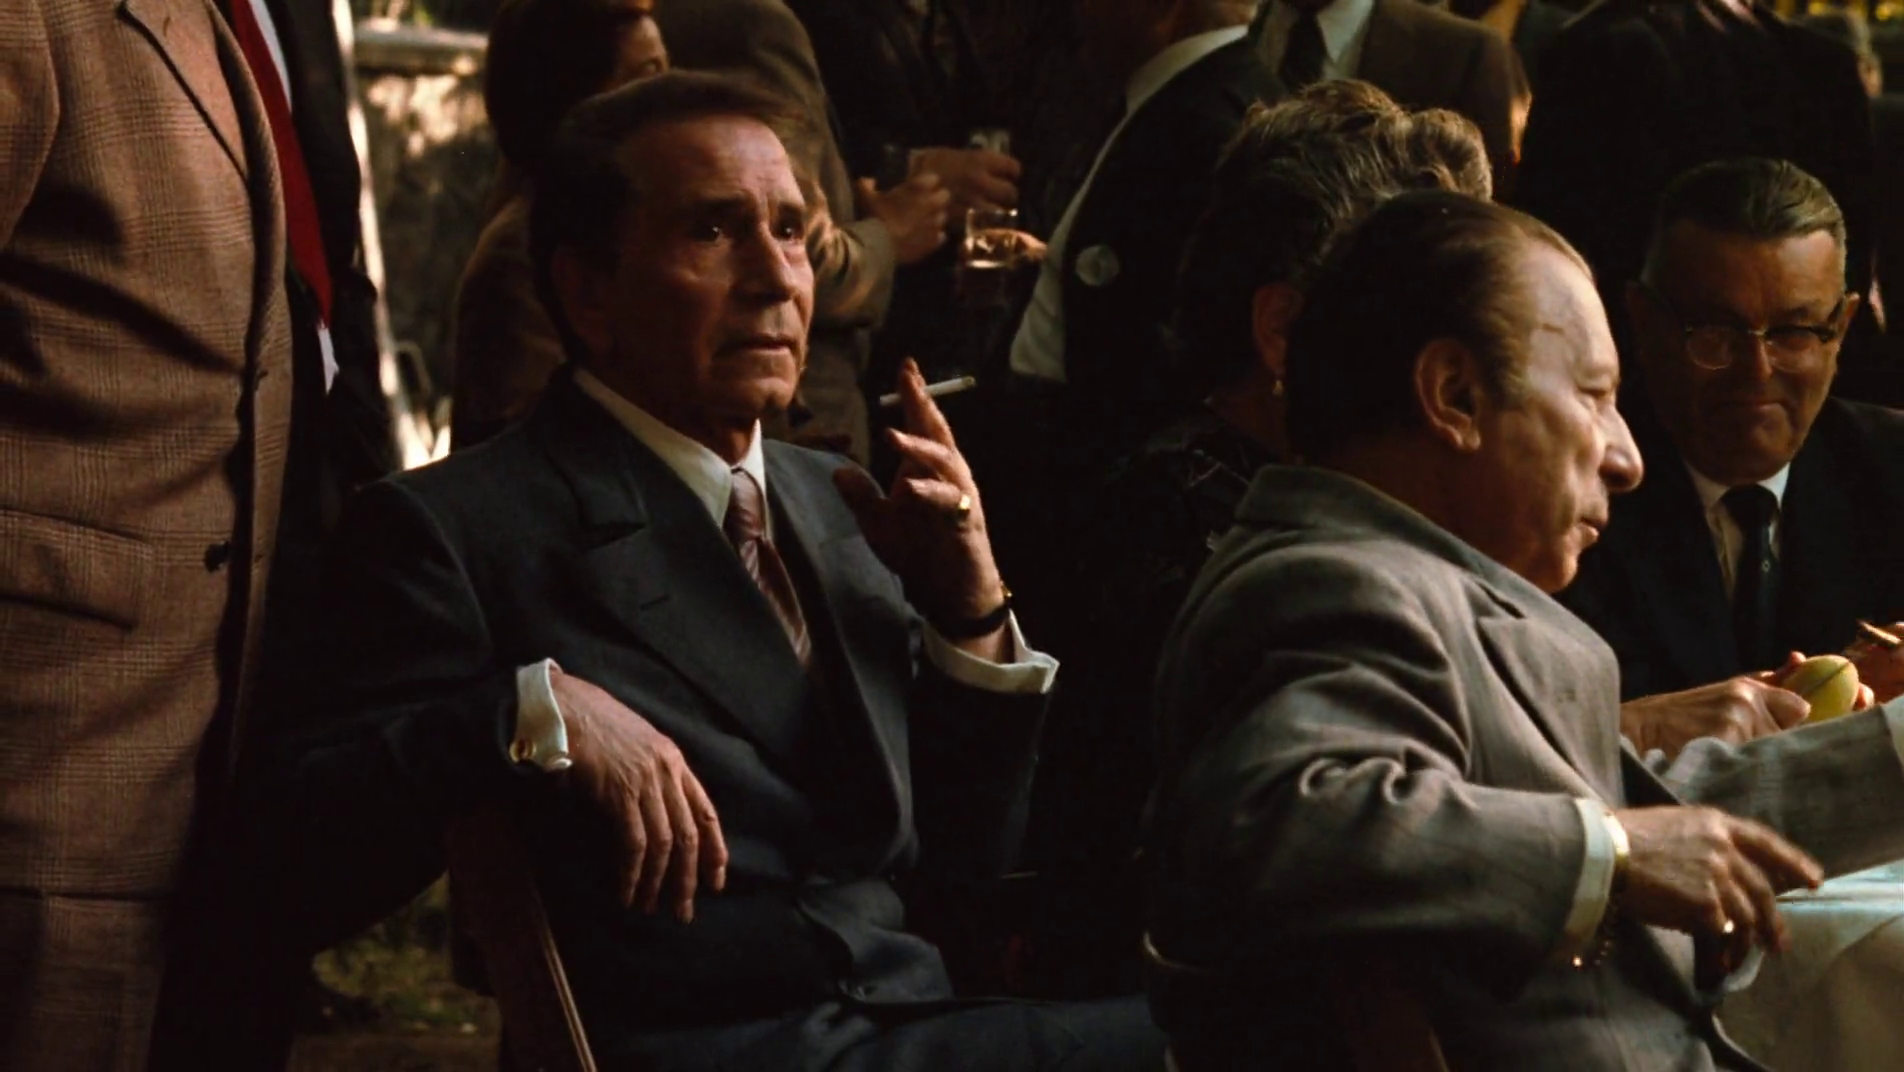 Image result for richard conte in the godfather